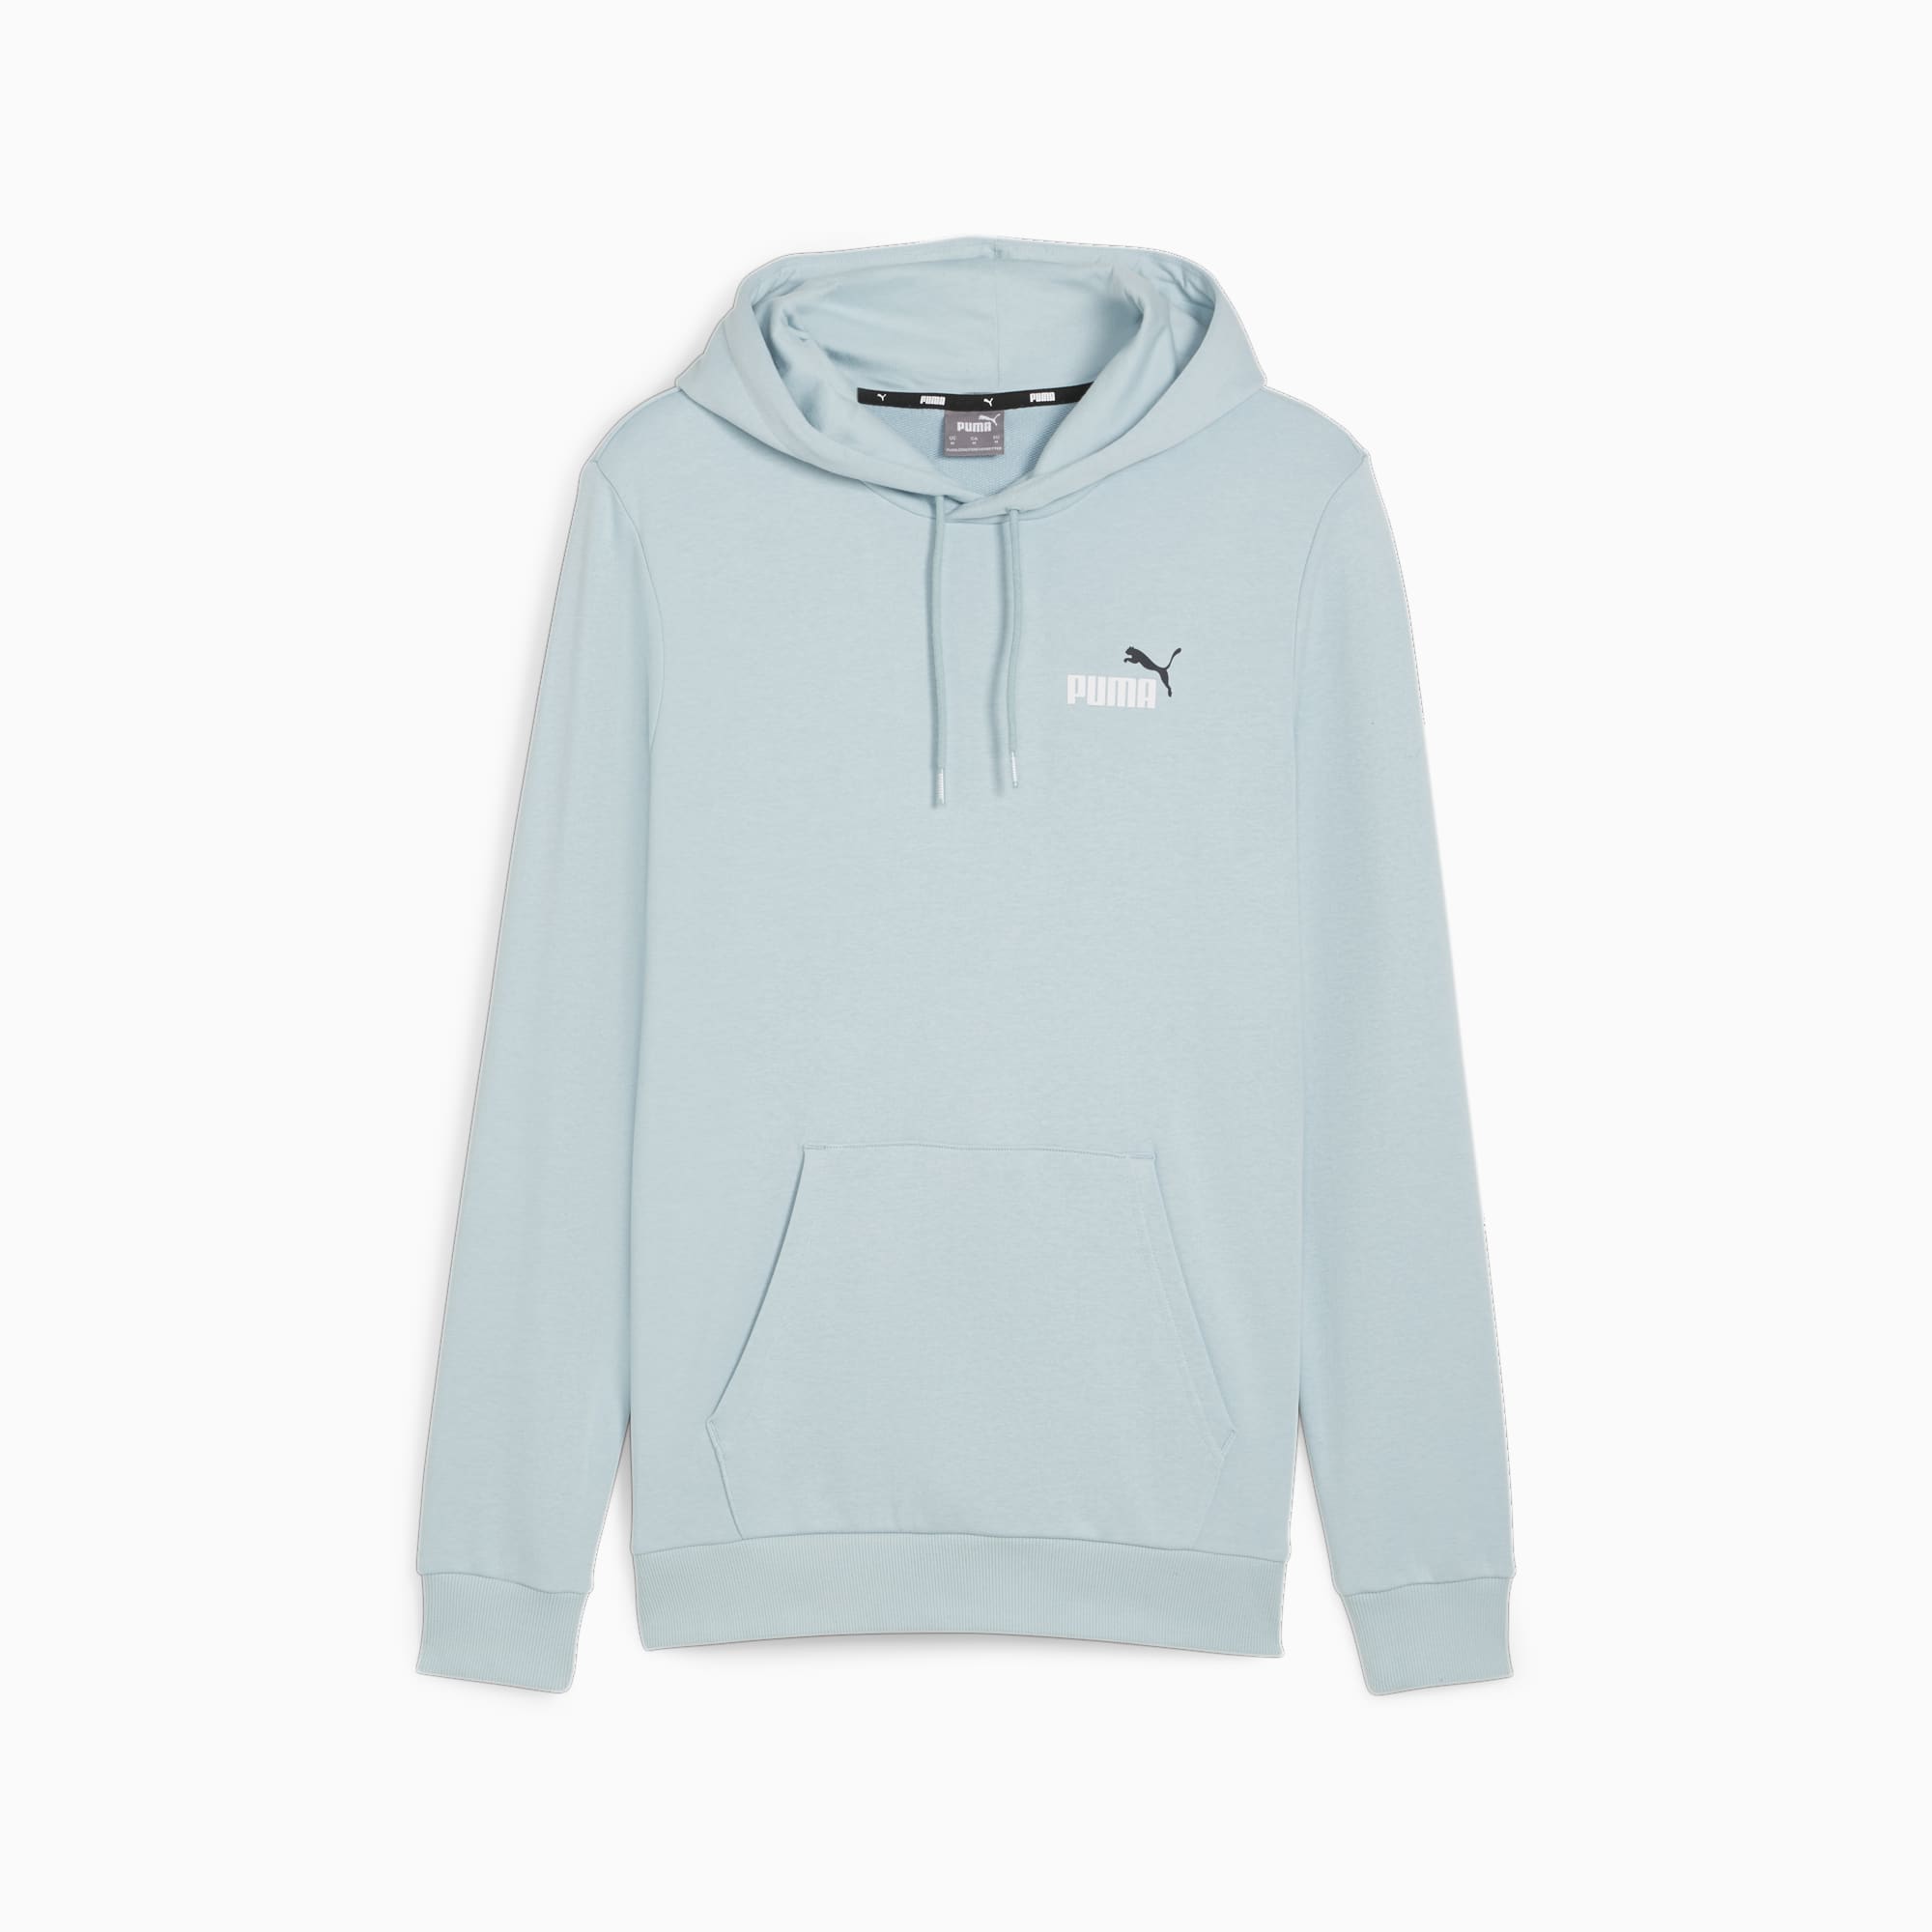 PUMA Ess+ Small Logo Men's Hoodie, Turquoise Surf, Size XS, Clothing